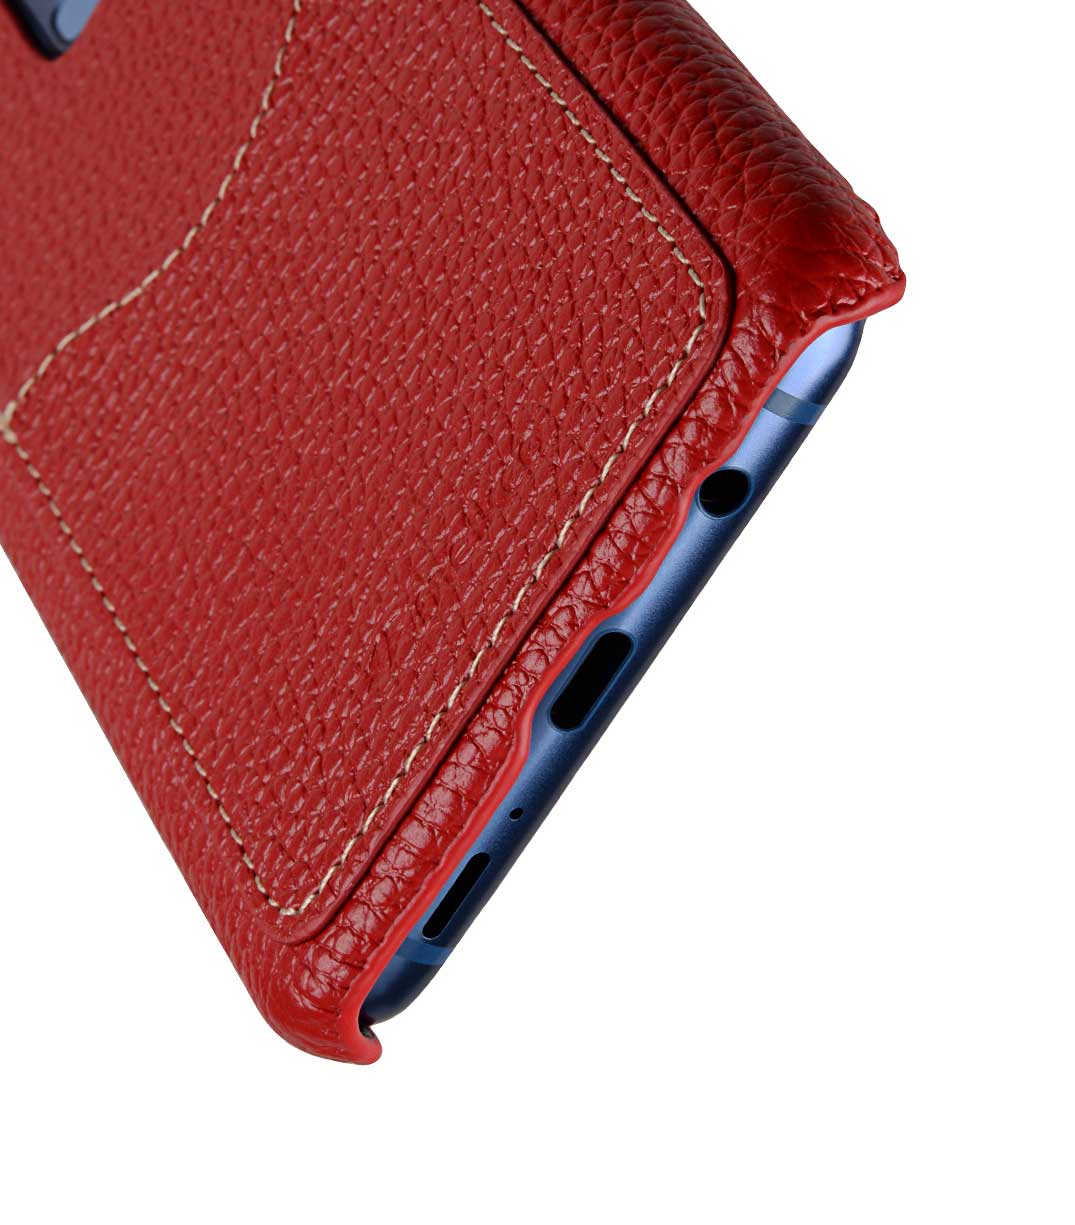 Melkco Premium Leather Card Slot Back Case for Samsung Galaxy S9 Plus - (Red LC)Ver.2